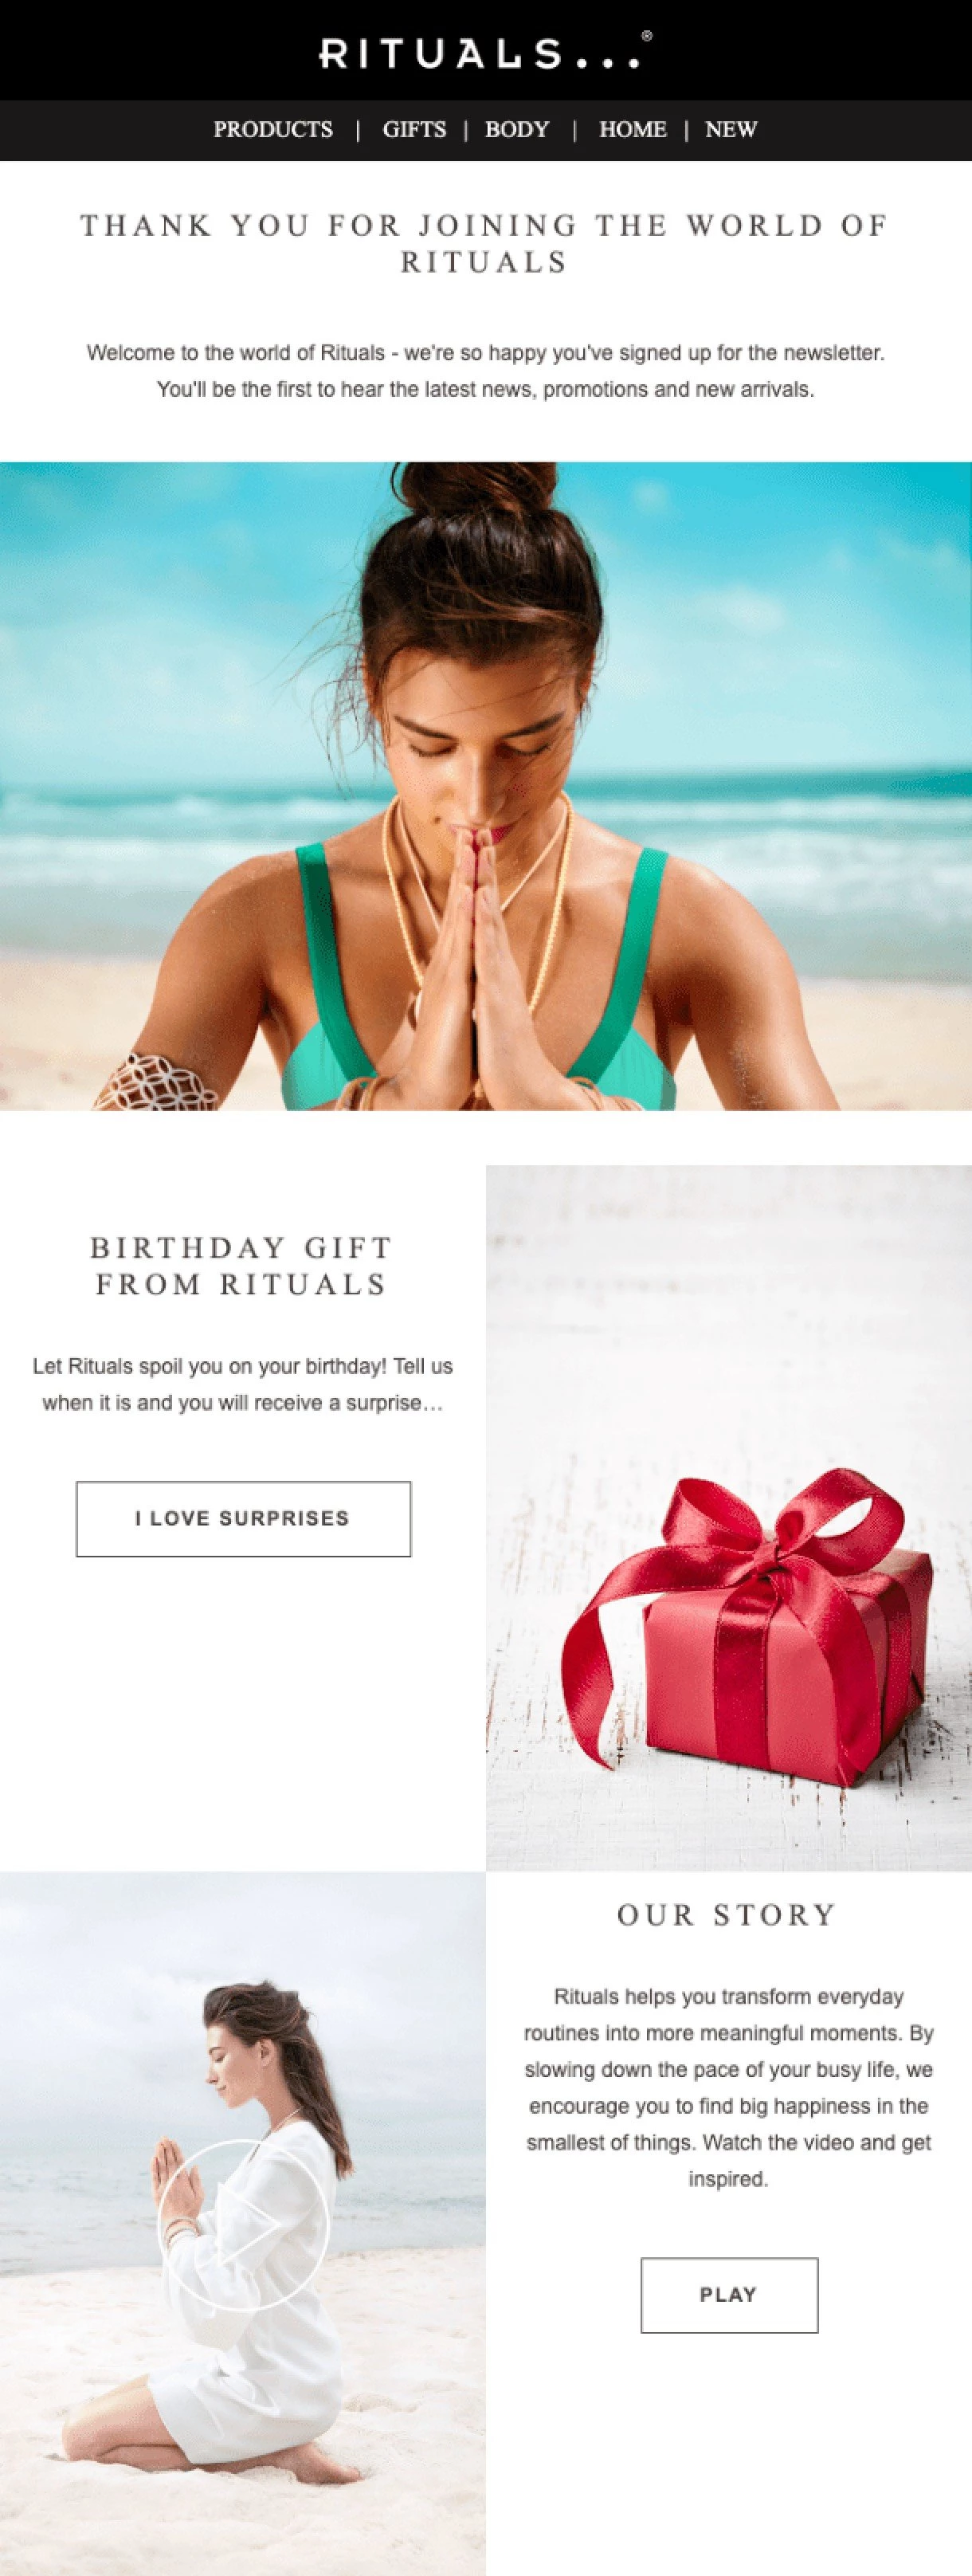 Rituals e-commerce email example birthday gift